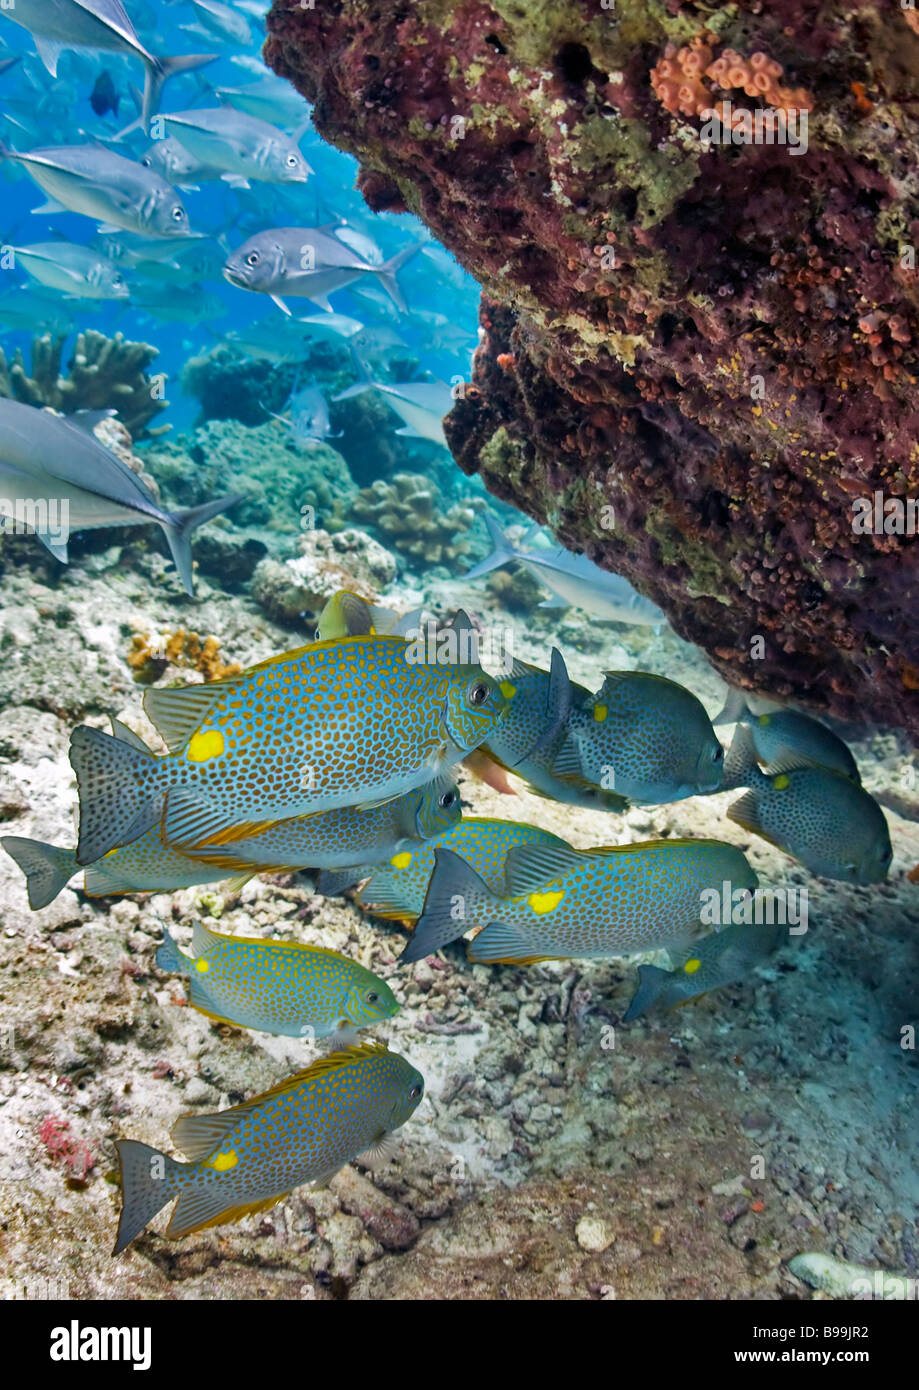 A small school of Spotted or Golden Rabbitfish search for their dinner under the coral reef at Barracuda Point, Sipadan Island. Stock Photo